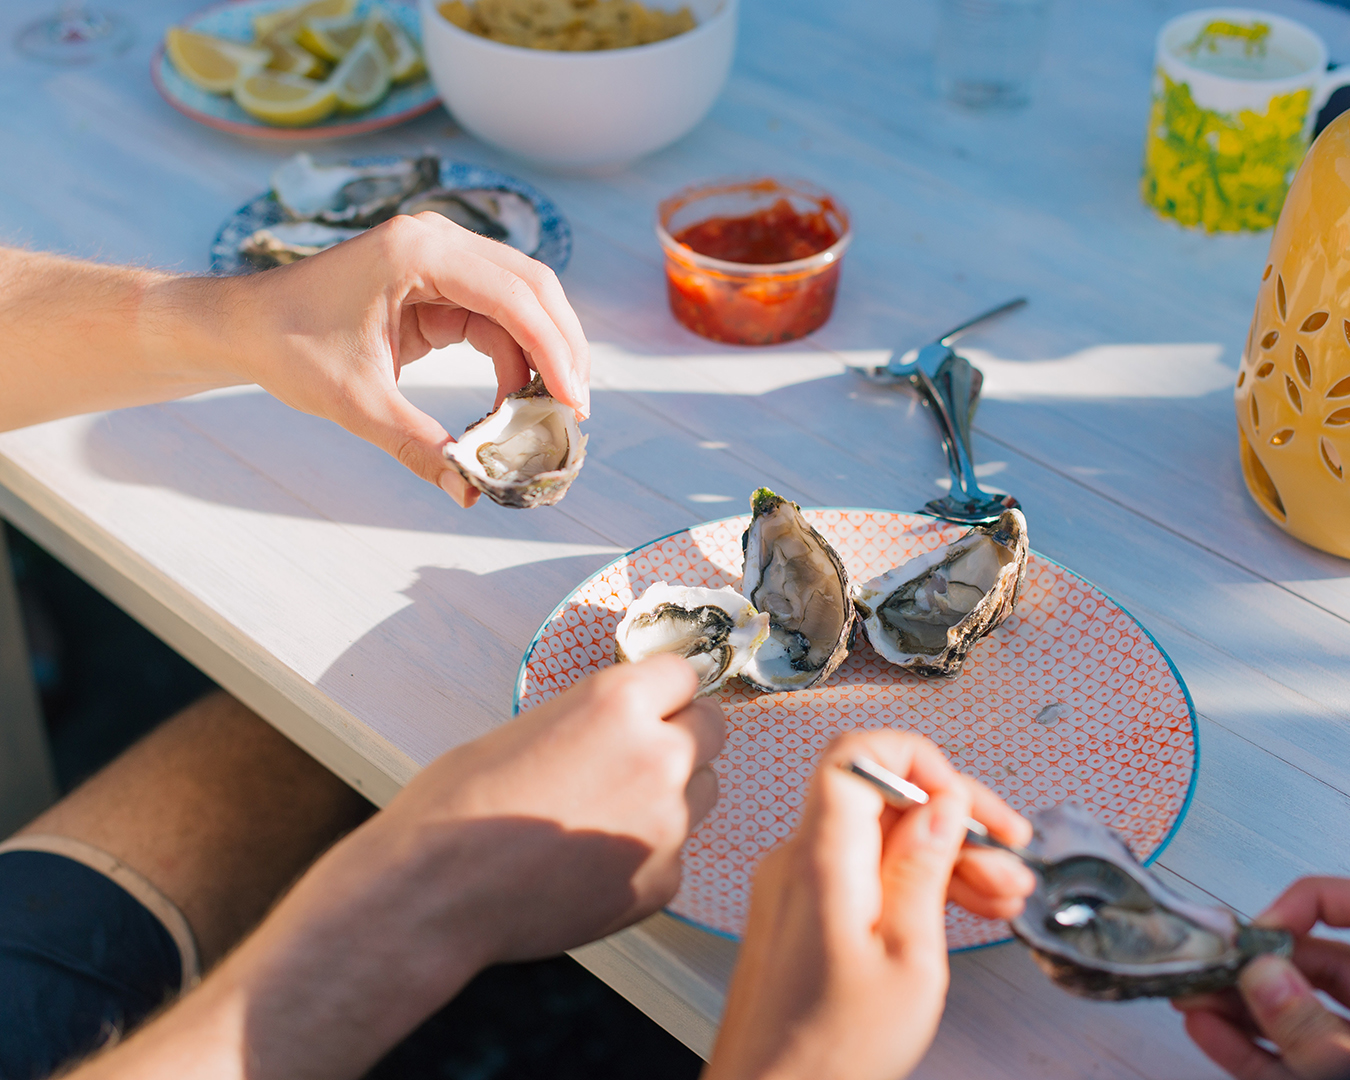 hands reaching for and holding oysters and a summery table spread